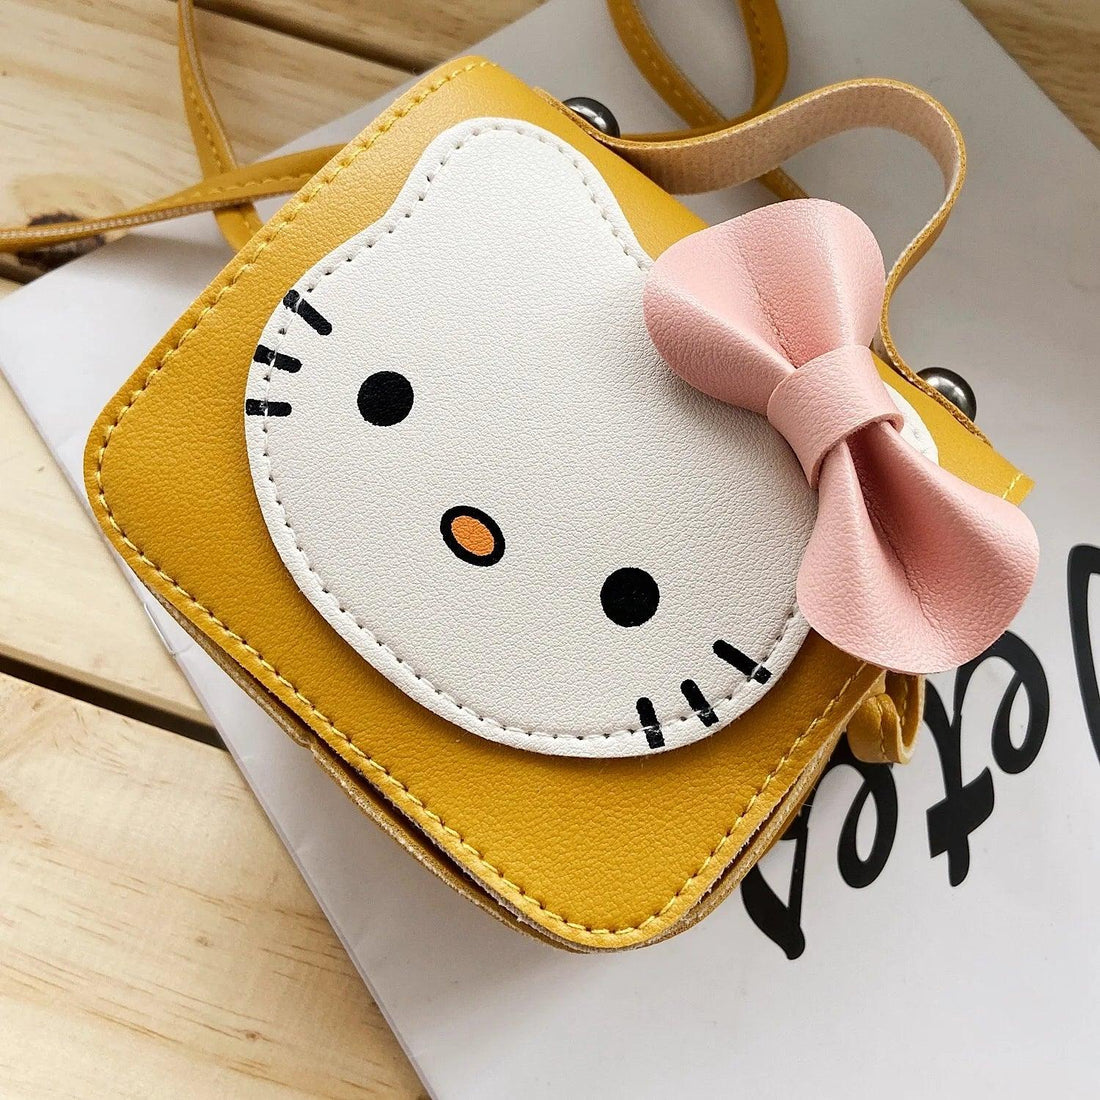 Hello Kitty PU Shoulder/crossbody Bag for Girls, 5 Colors - Just Cats - Gifts for Cat Lovers